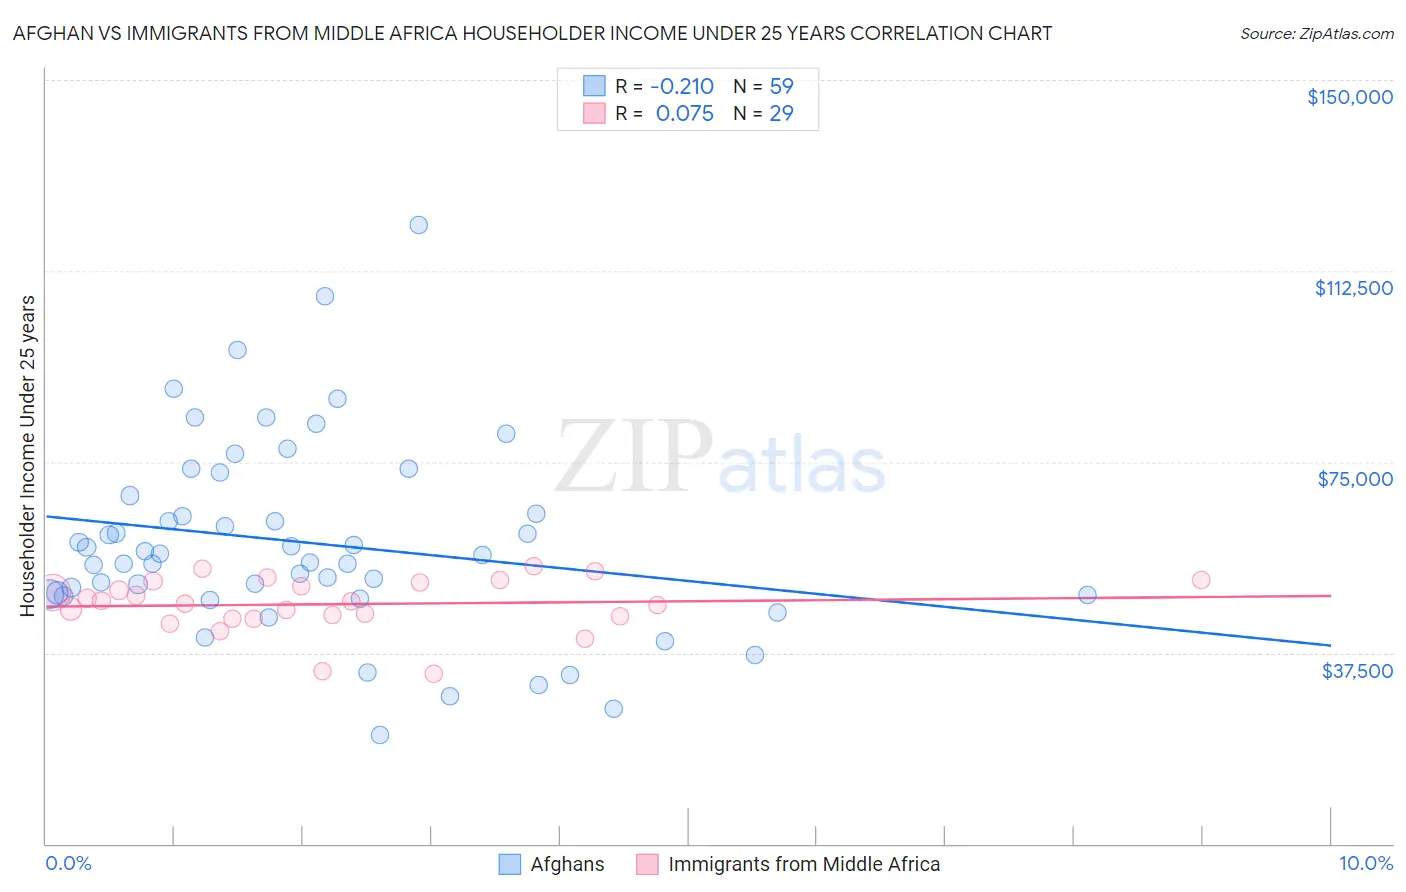 Afghan vs Immigrants from Middle Africa Householder Income Under 25 years